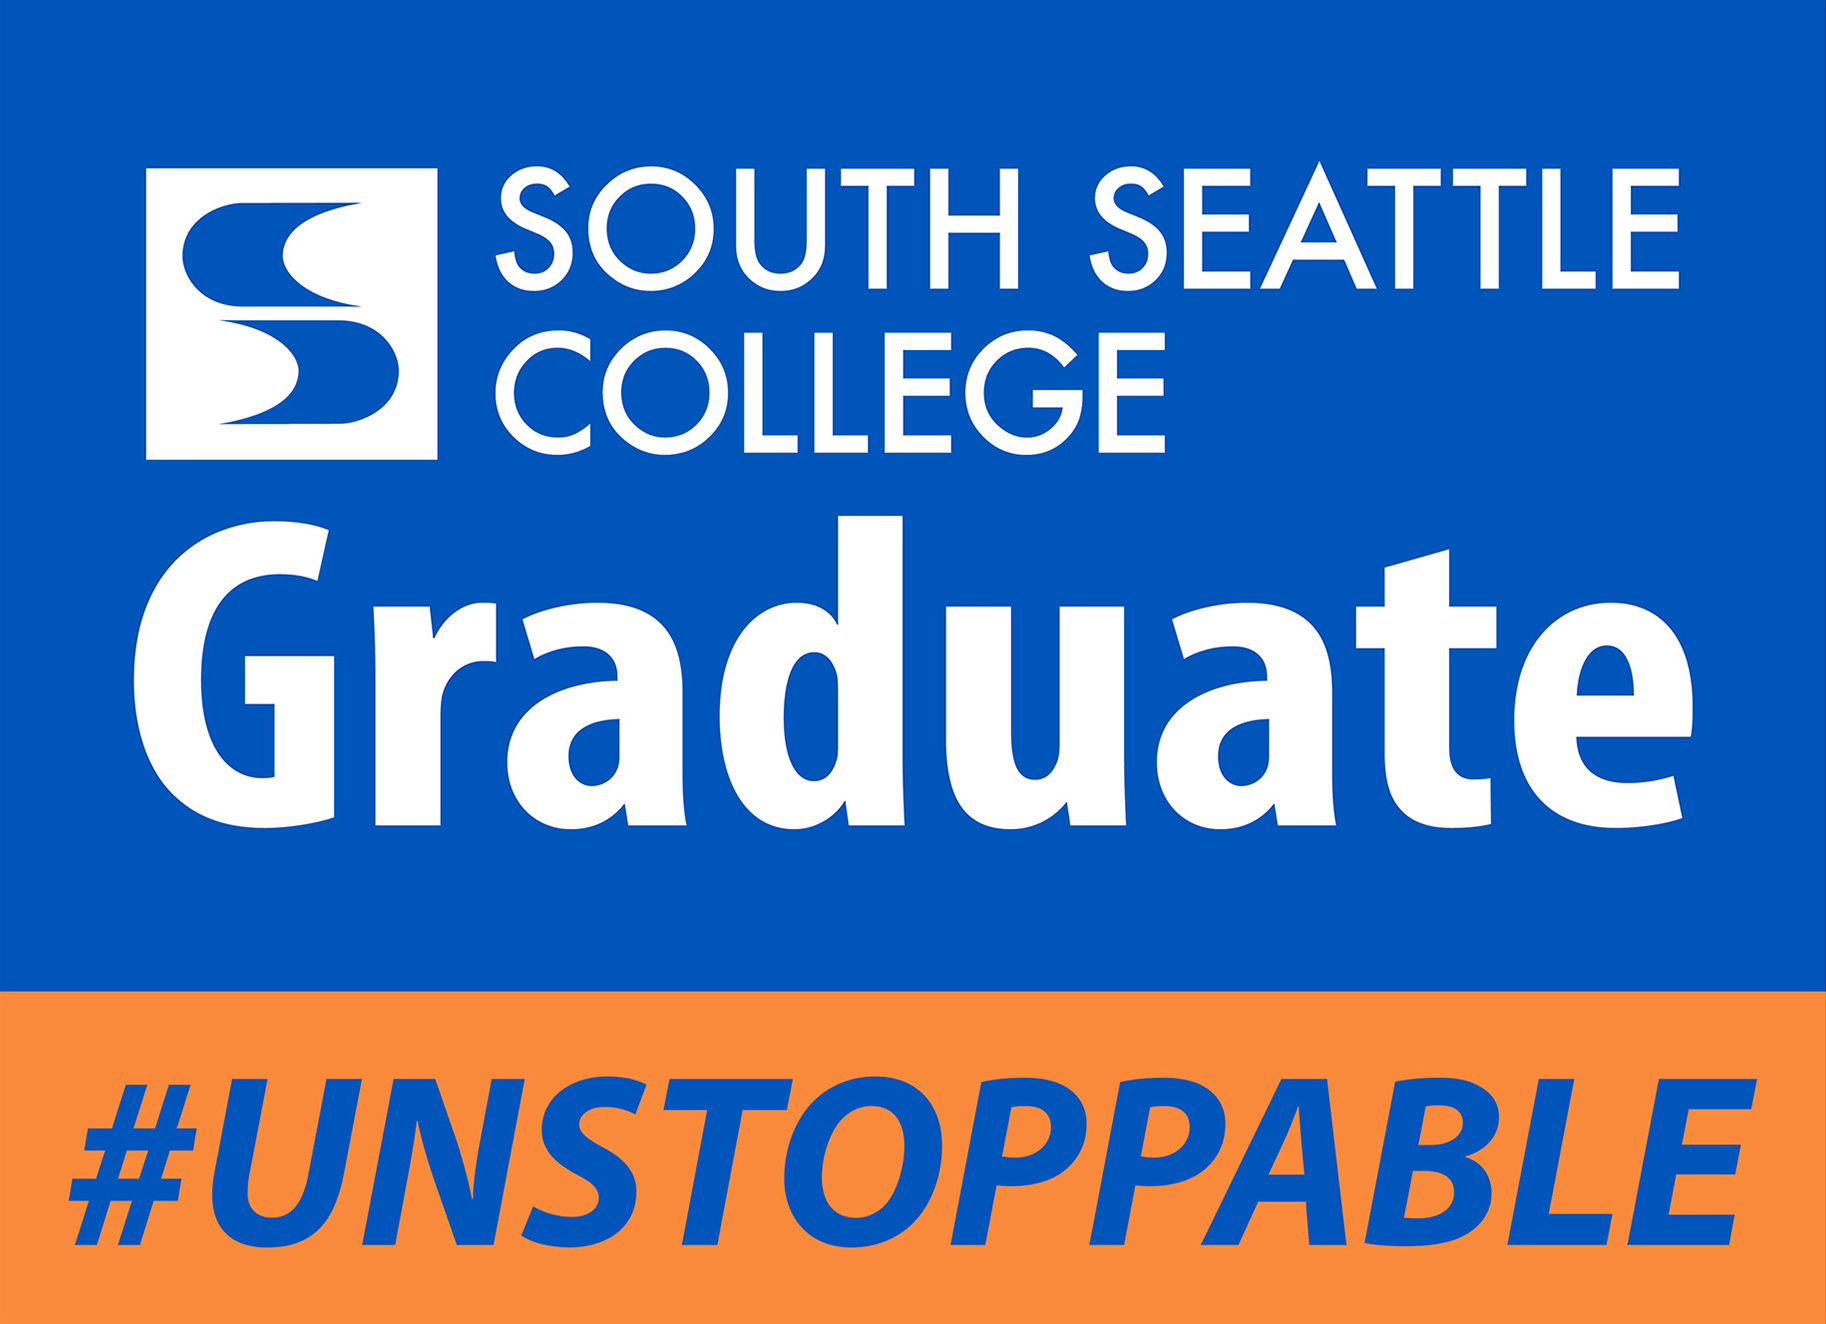 South Seattle Graduate UNSTOPPABLE yard sign